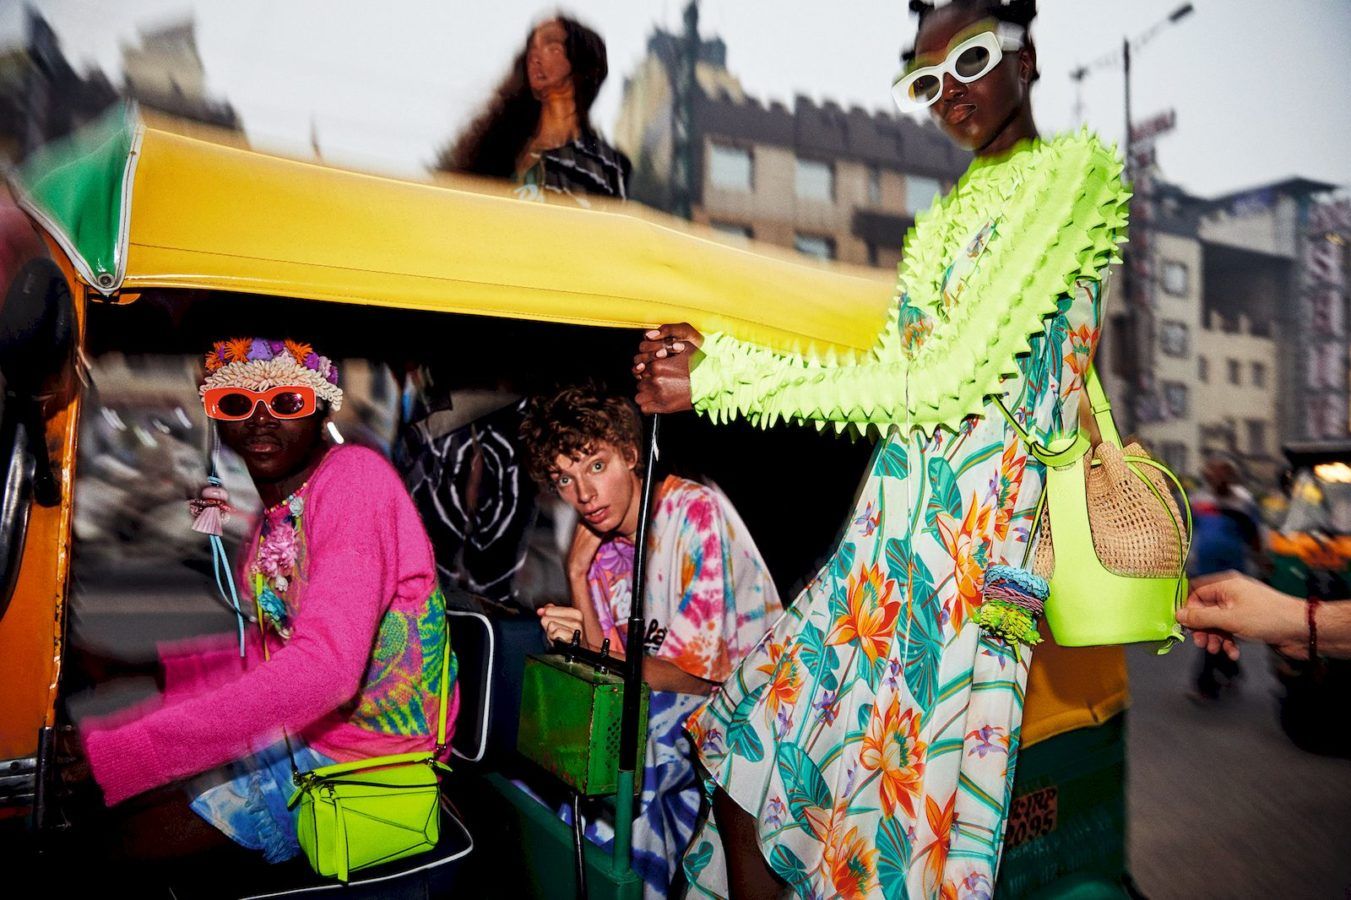 The article: THE NEW LOEWE CAMPAIGN BRINGS PLAYFULNESS BACK TO LIFE